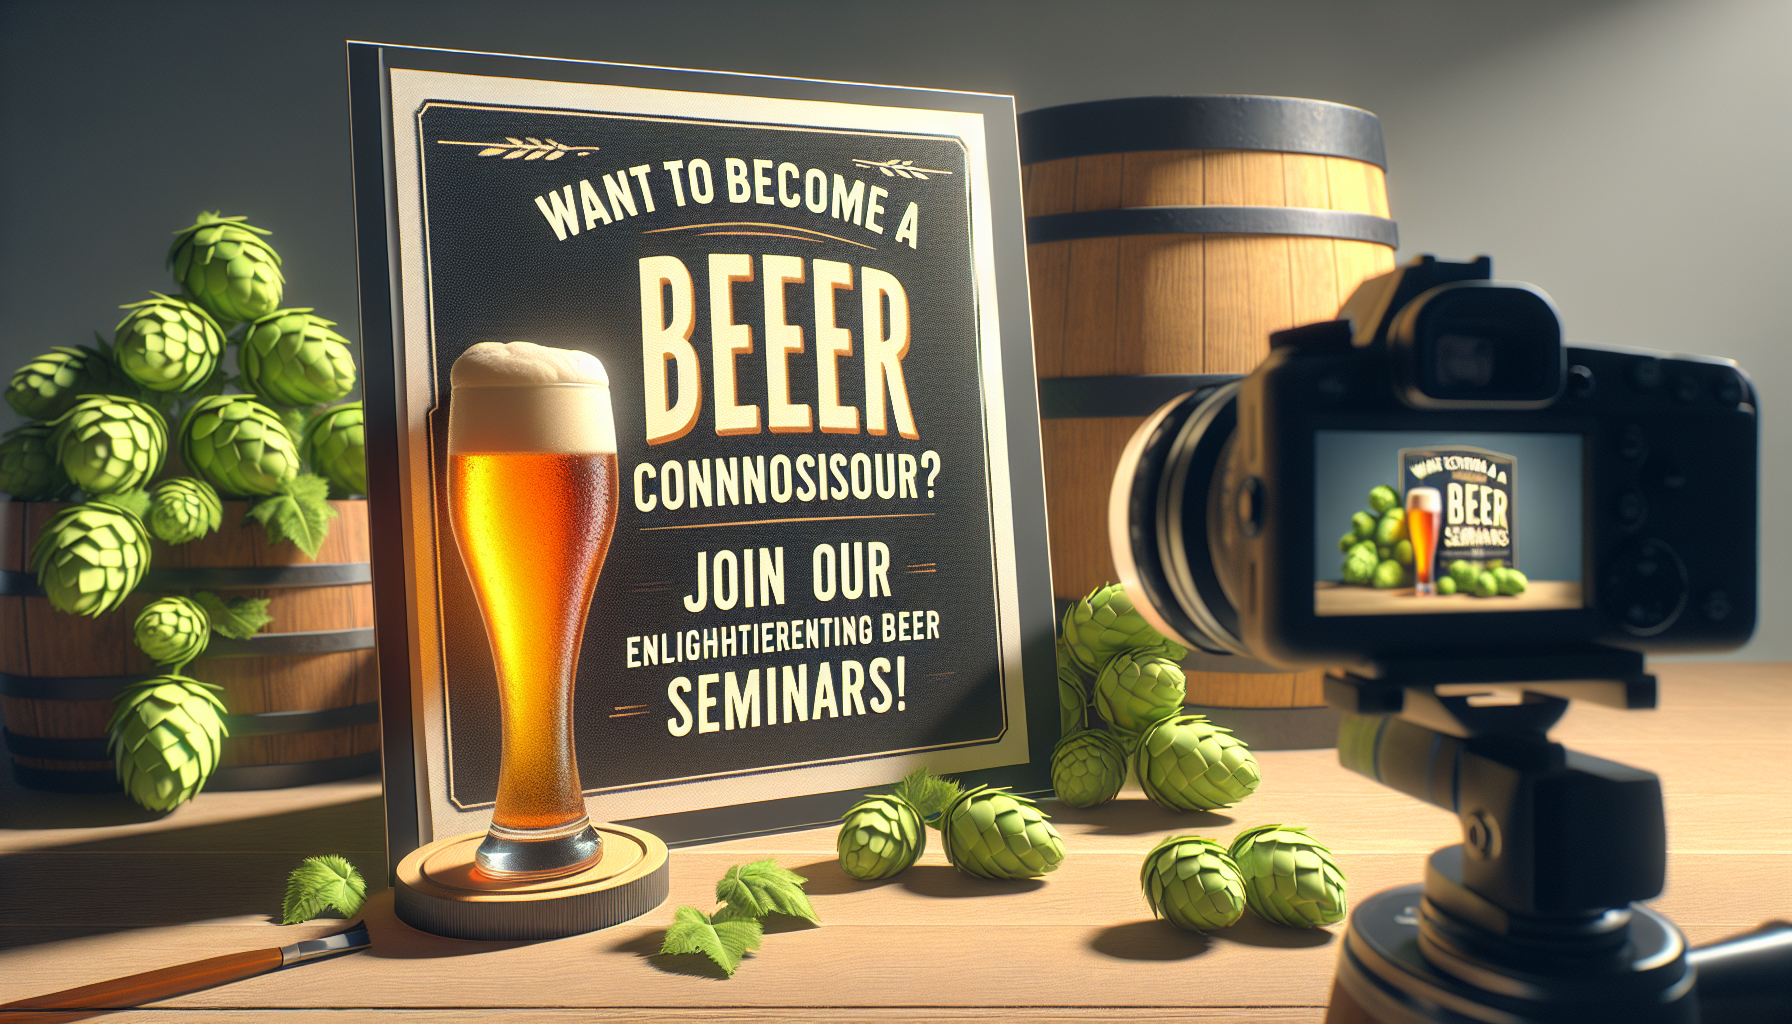 Want to become a beer connoisseur? Join our enlightening beer seminars!